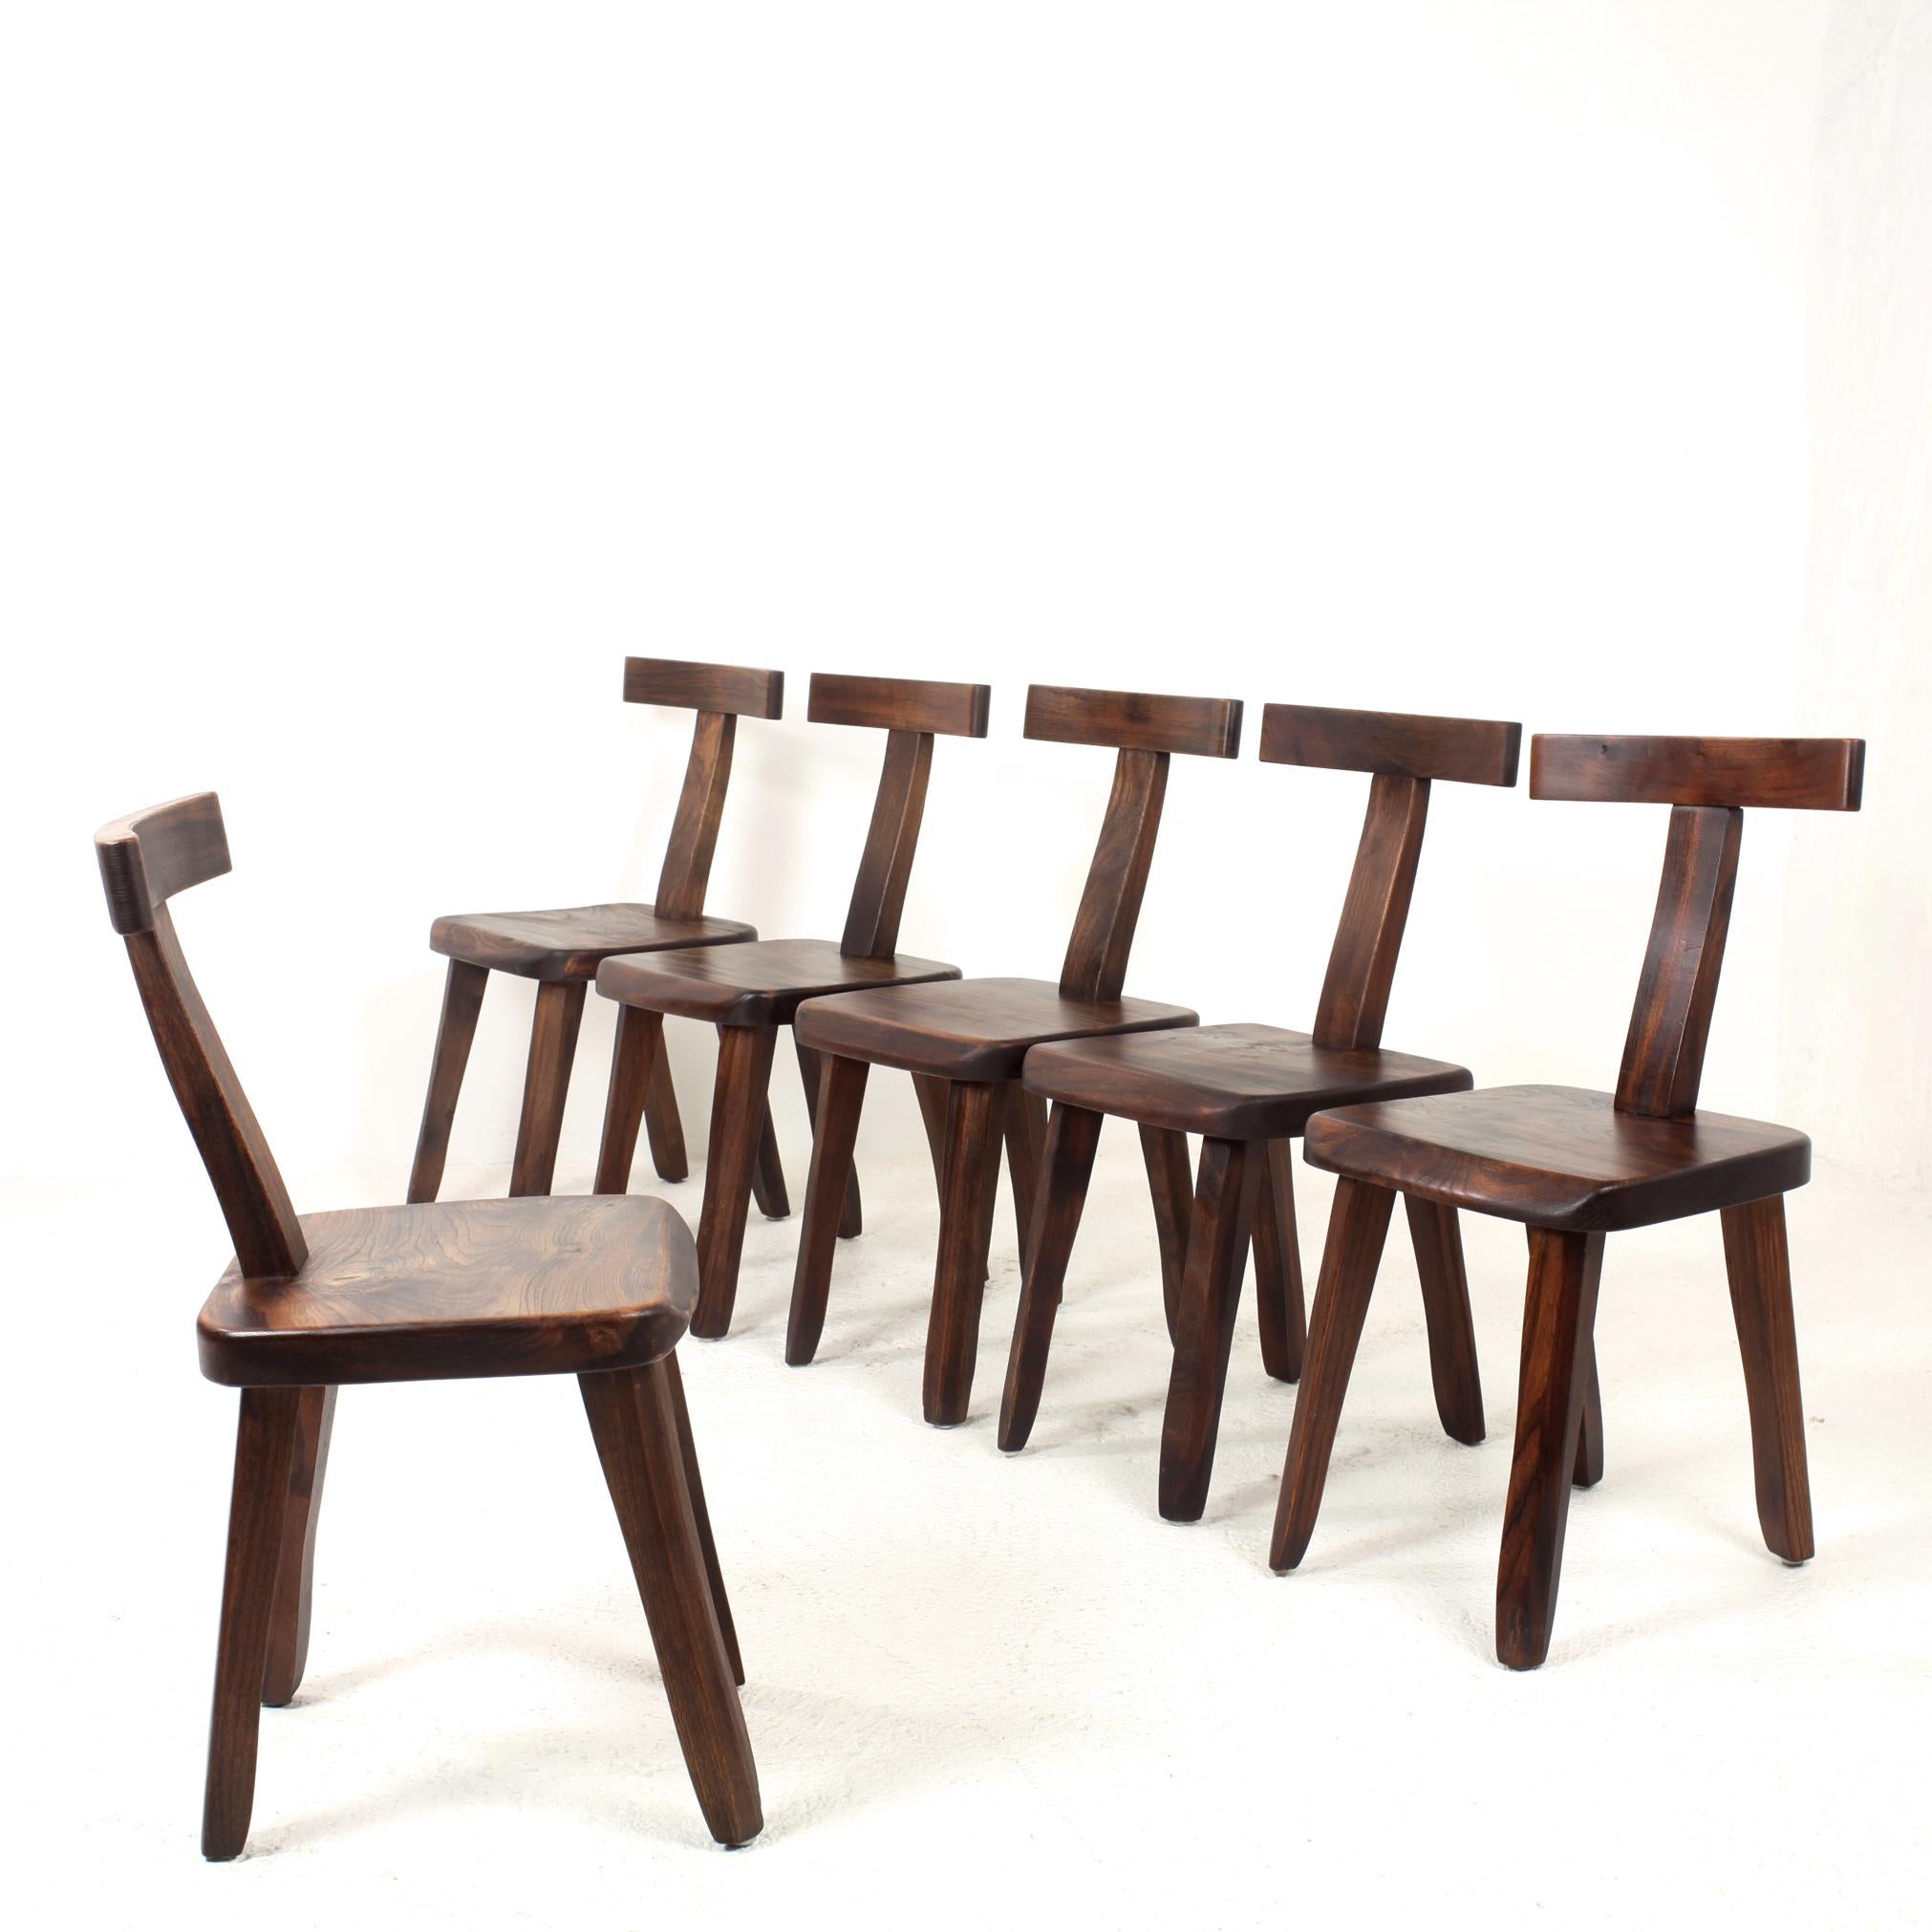 Finnish Sculptural Dining T-Chairs by Olavi Hanninen Set of 6